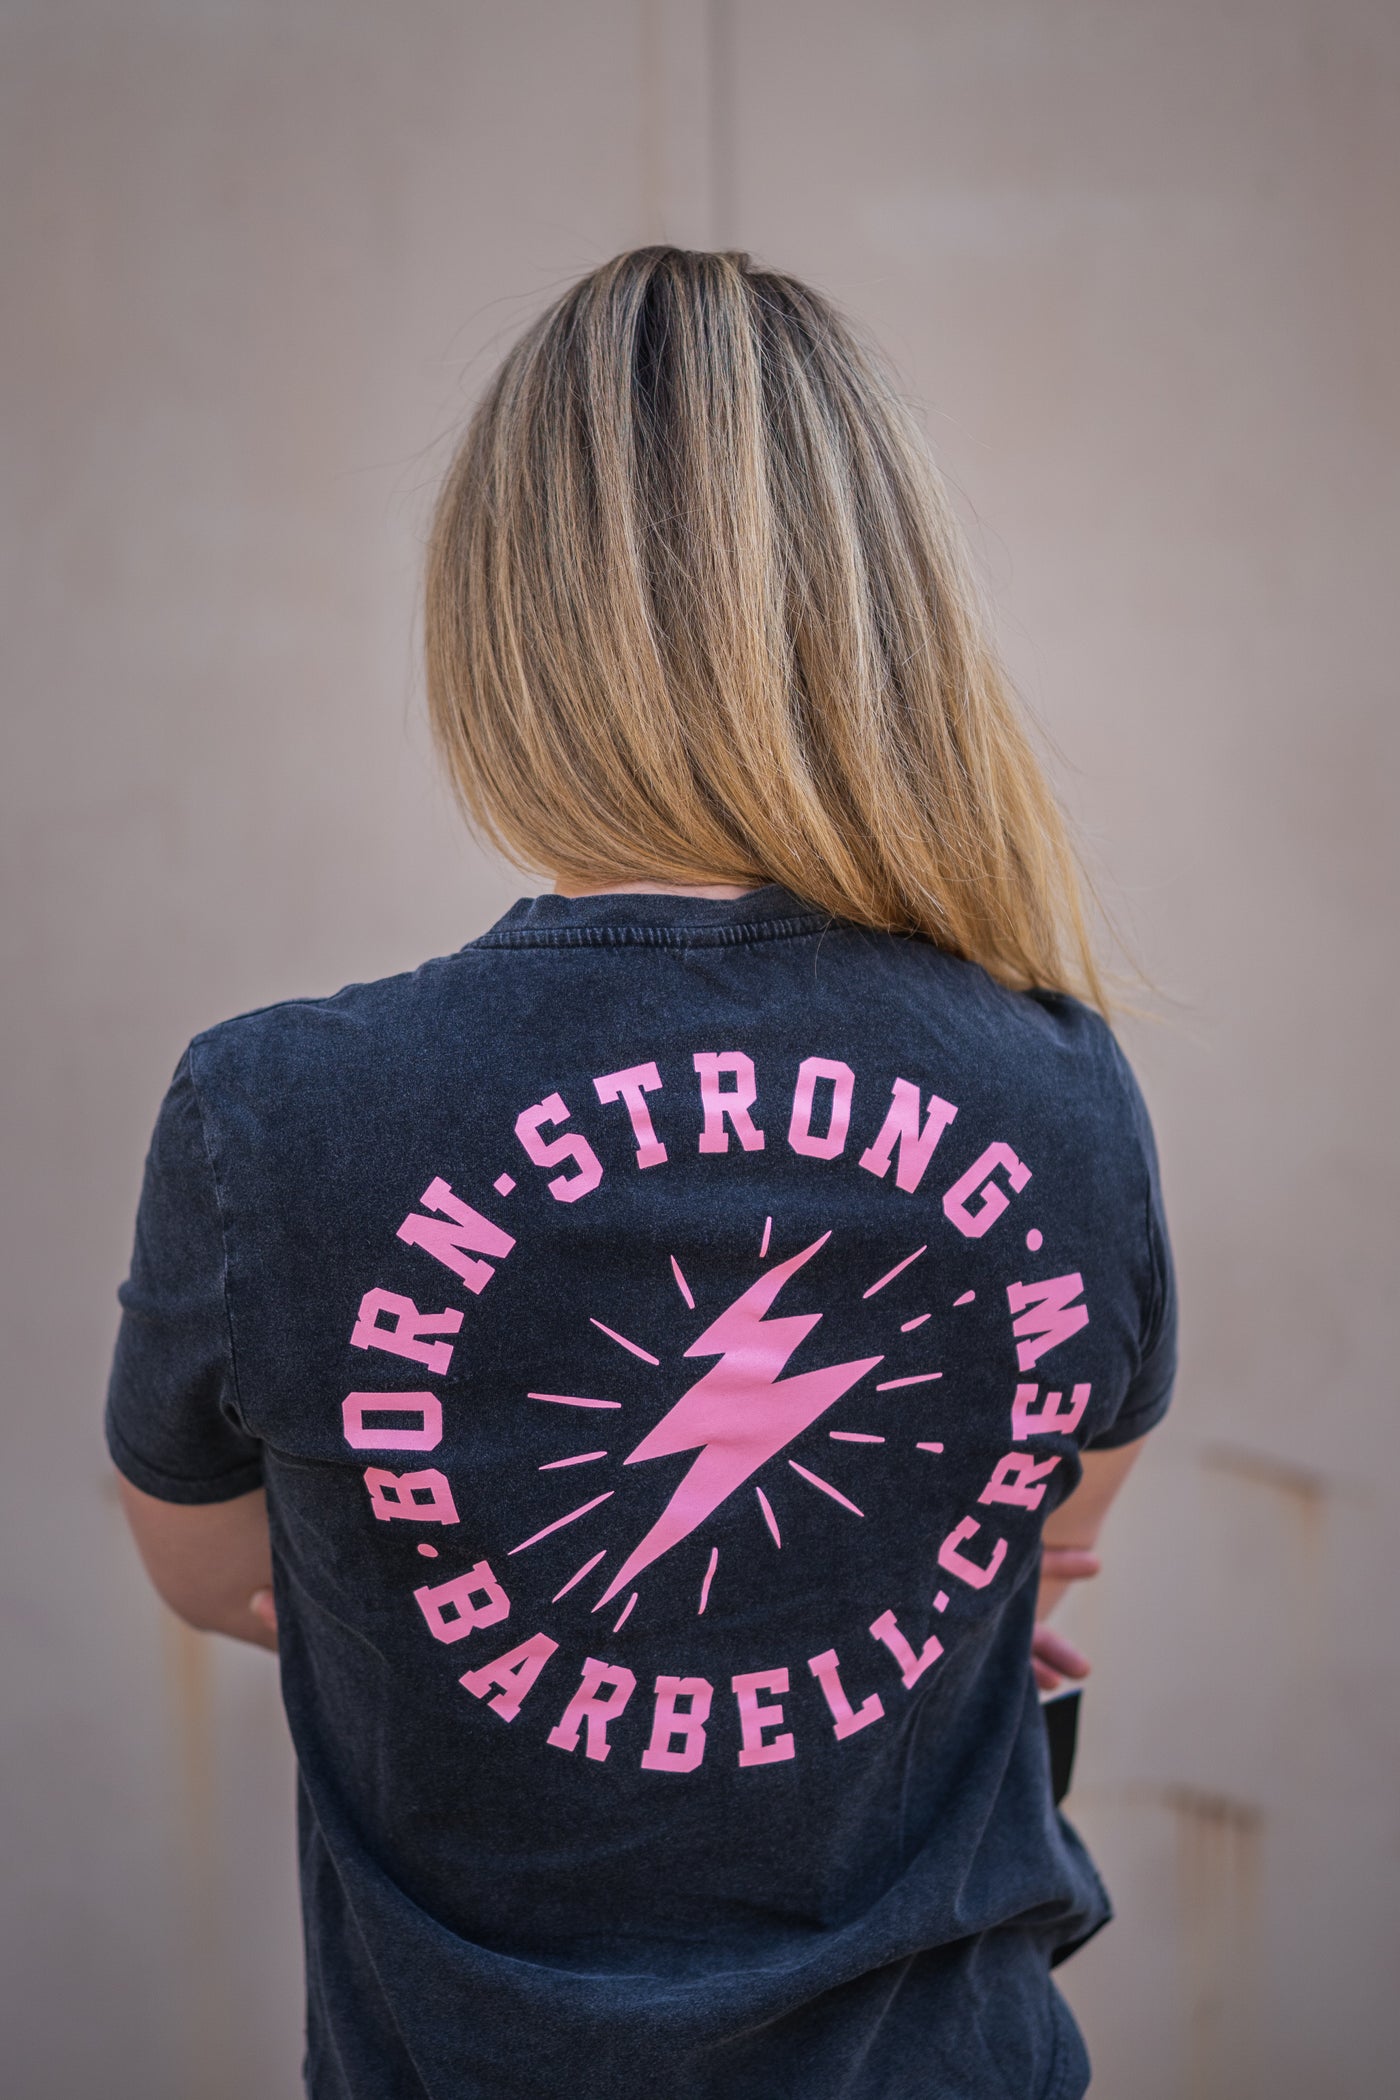 BARBELL CREW -  LADIES  CURVED SHIRT